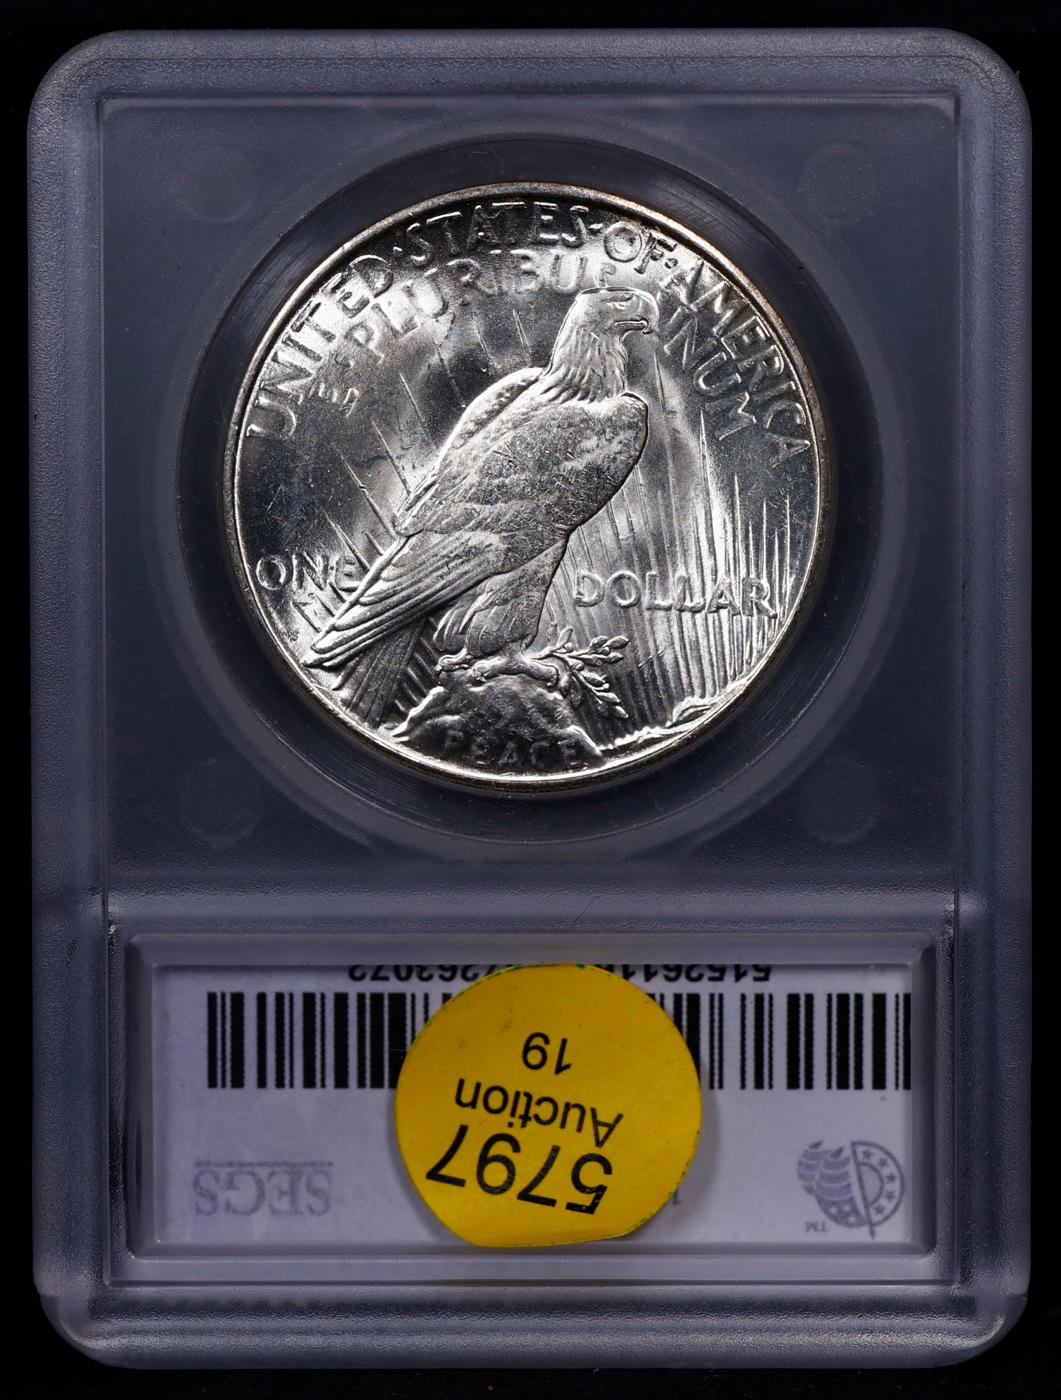 ***Auction Highlight*** 1923-s Peace Dollar $1 Graded ms64+ BY SEGS (fc)